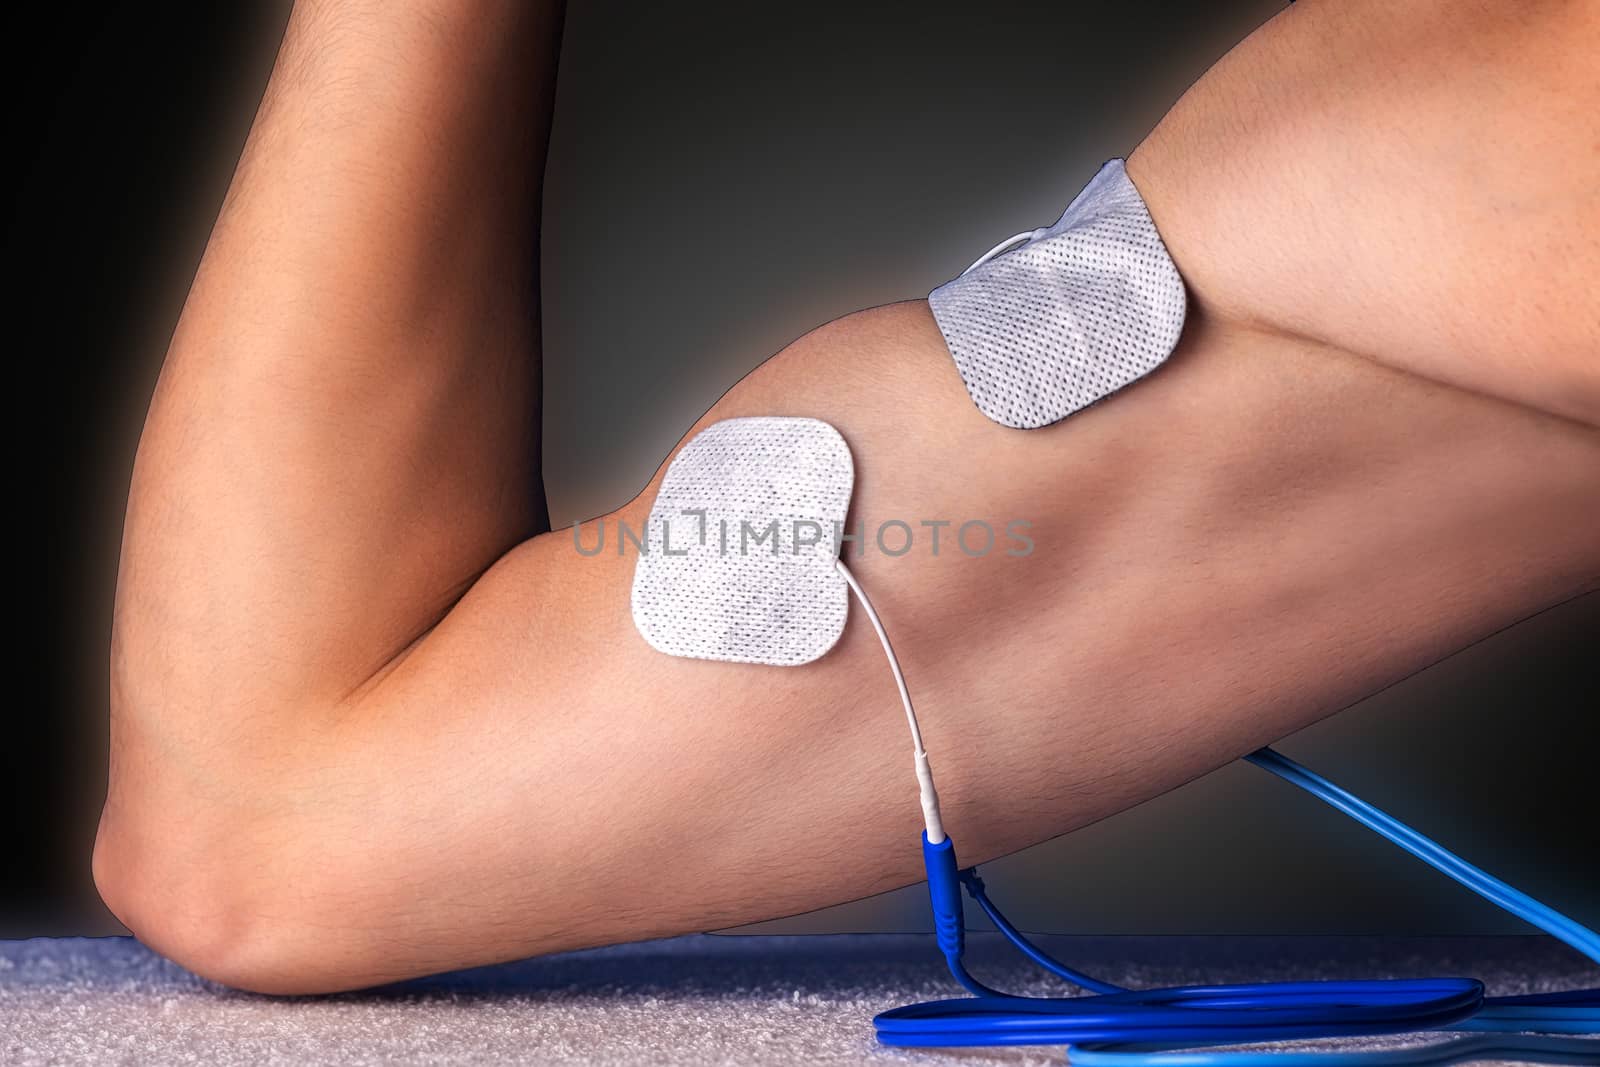 Electro stimulation of biceps for training, recovery or massage.